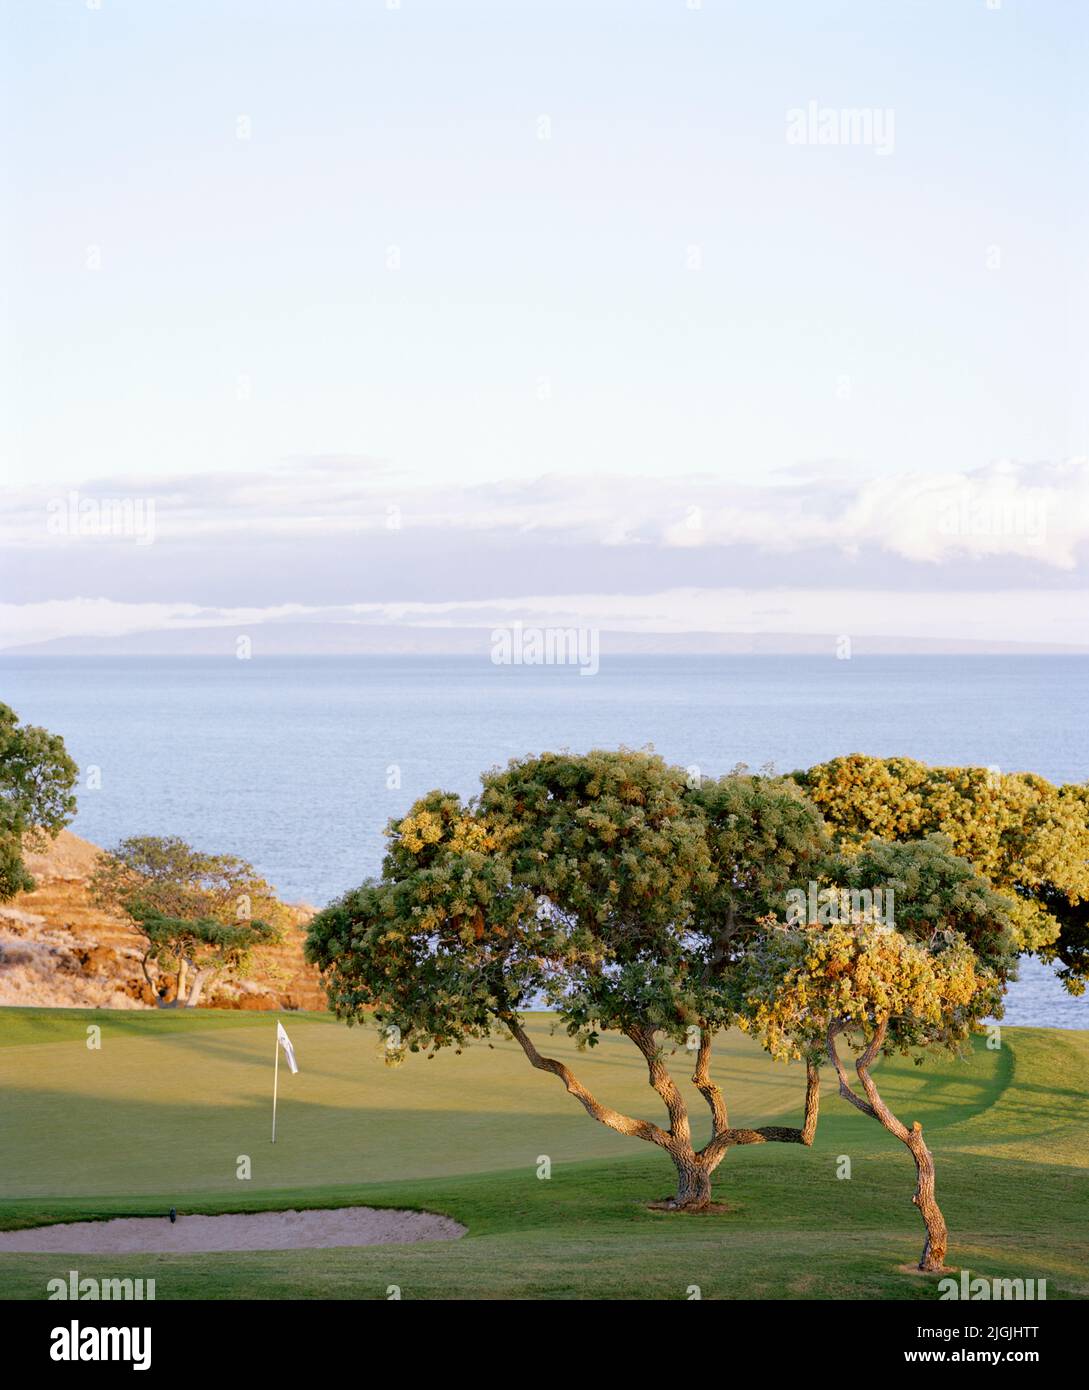 The 12th hole green of the Manele Golf Course which overlooks the Pacific Ocean at the Four Seasons Resort Lana'i at Manele Bay. Lana'i, Hawaii, USA. Stock Photo